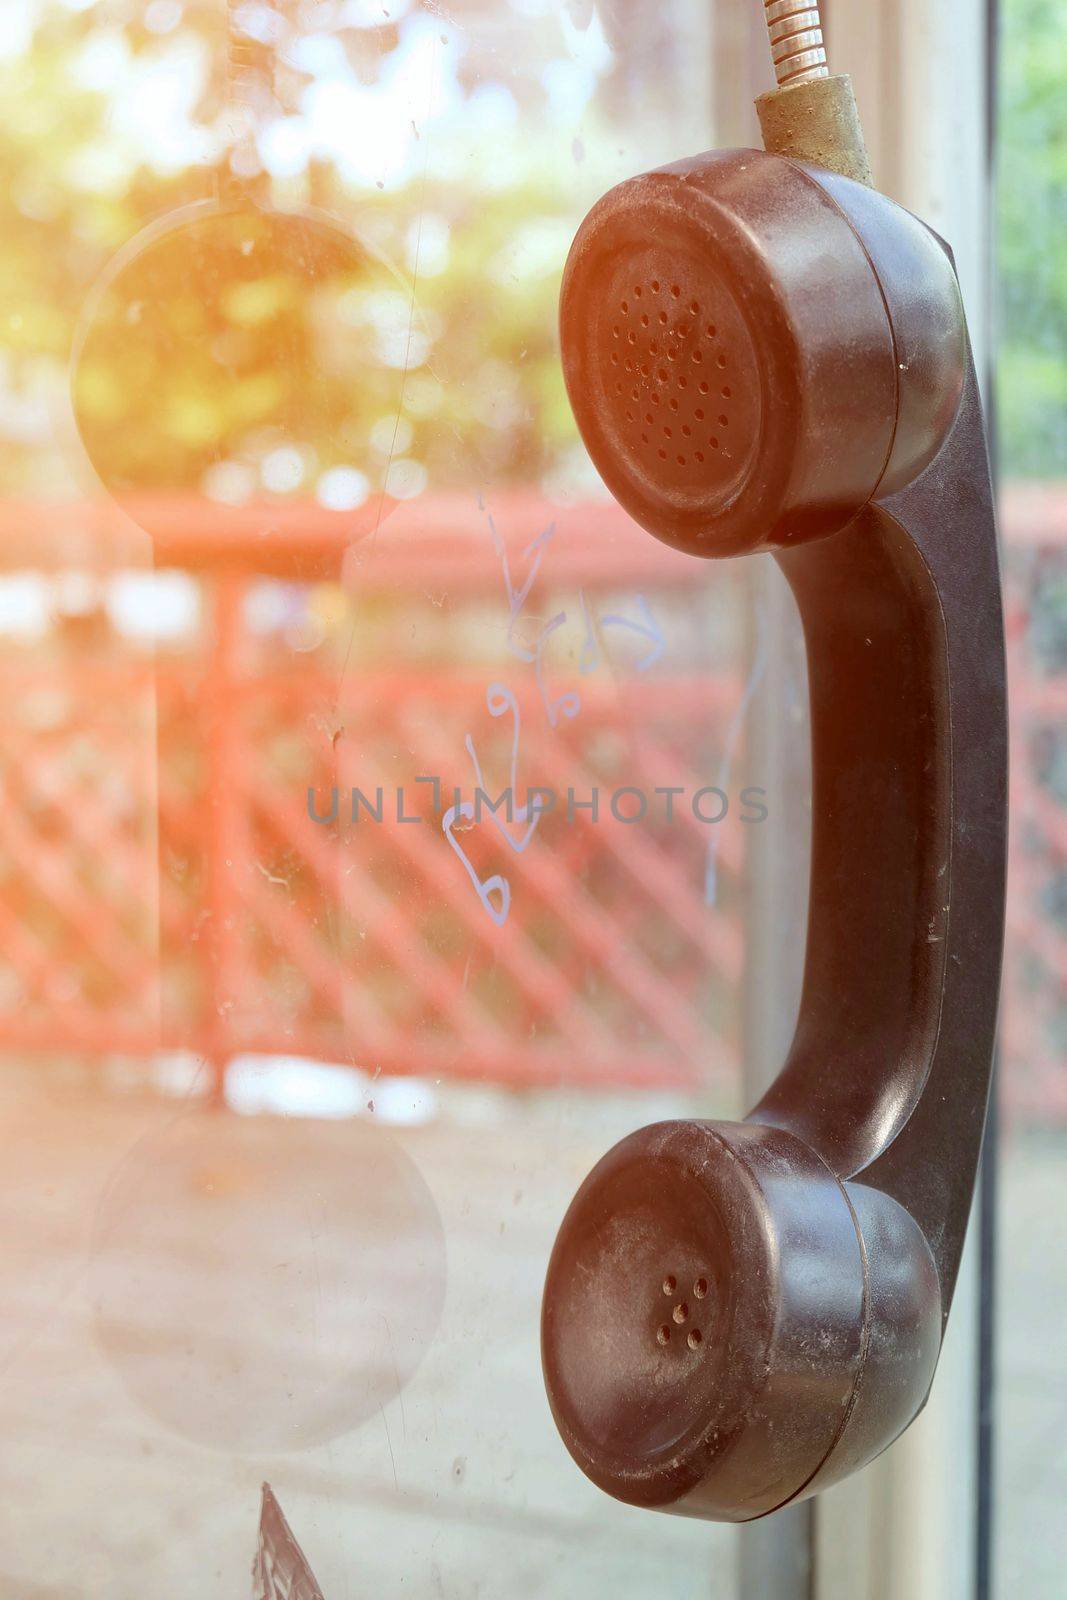 Old Public Telephones with Light Leak. by mesamong